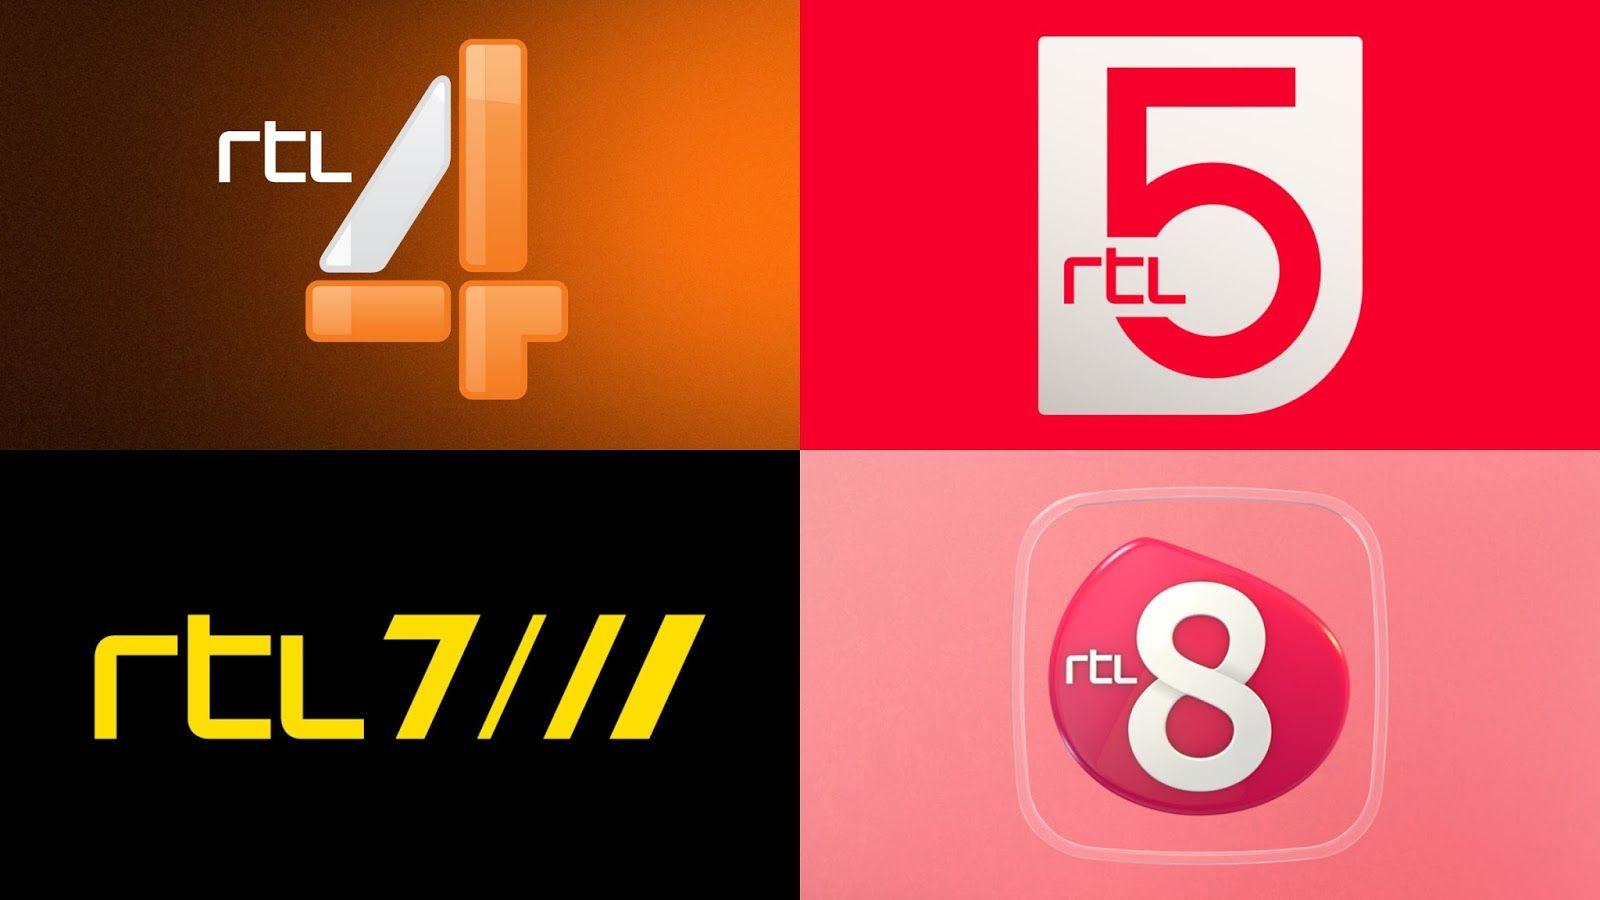 RTL Logo - The Branding Source: Big and small logo changes for RTL Netherlands